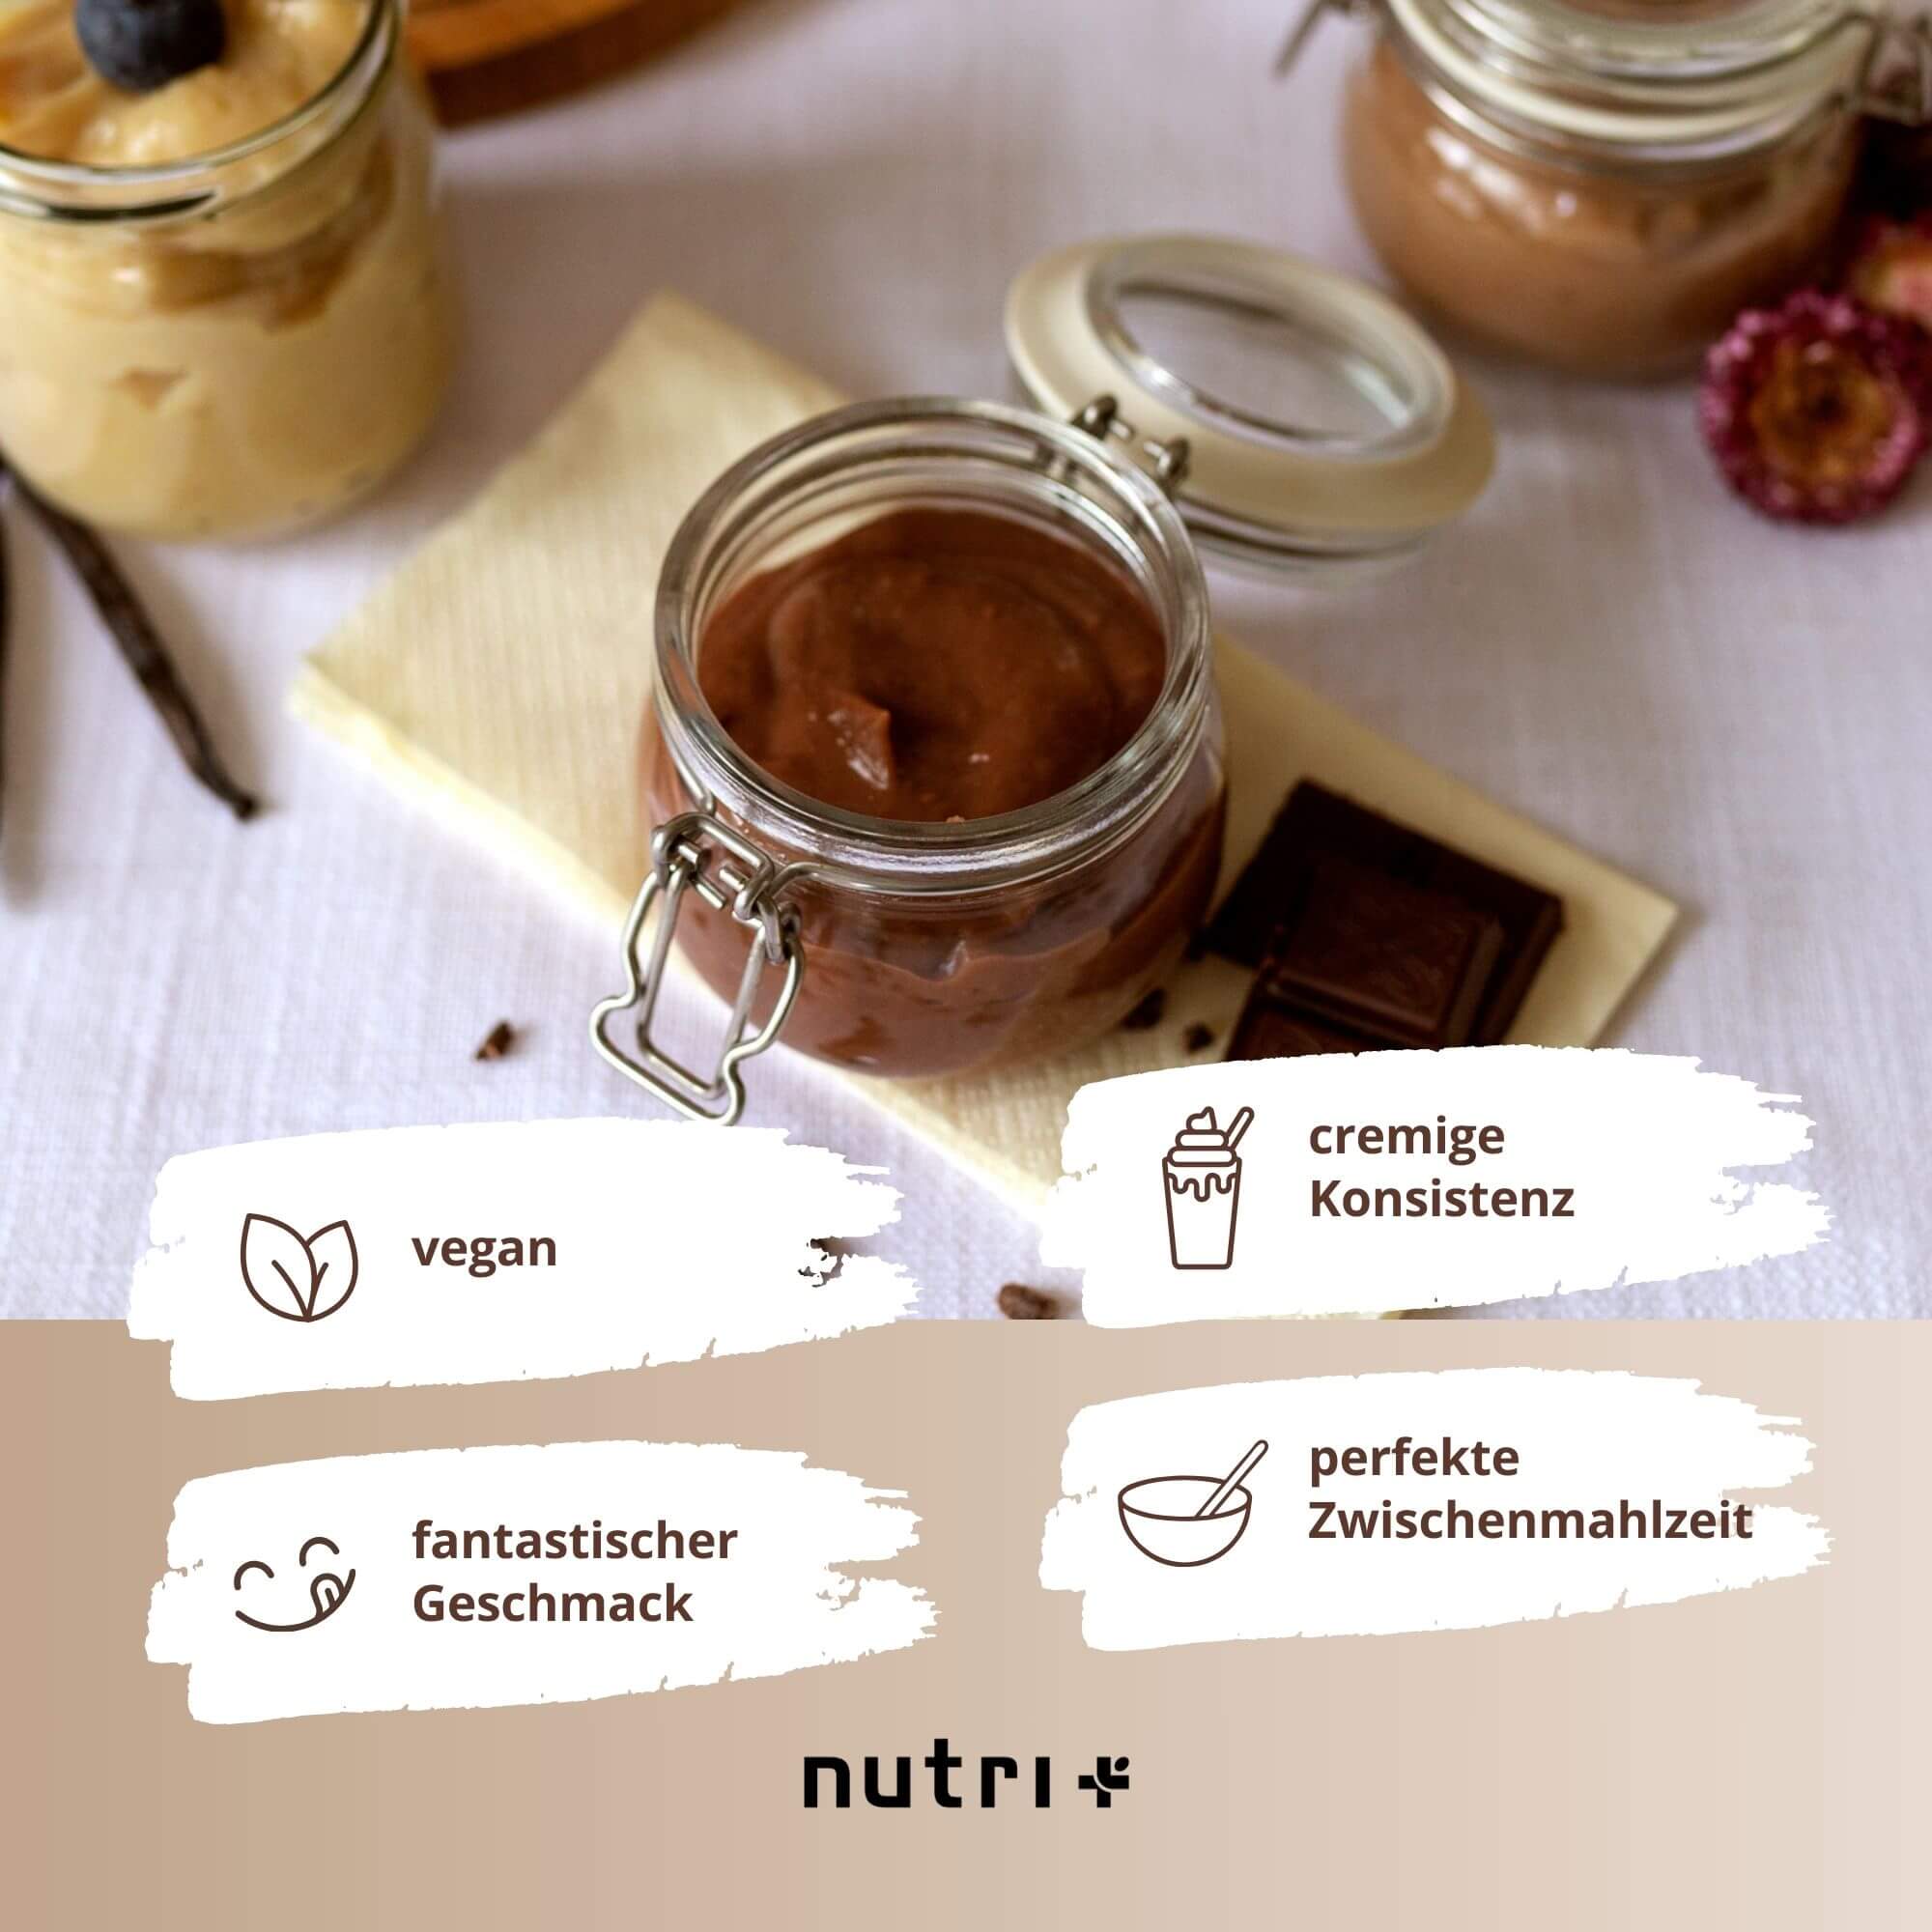 VHEY® Protein Pudding